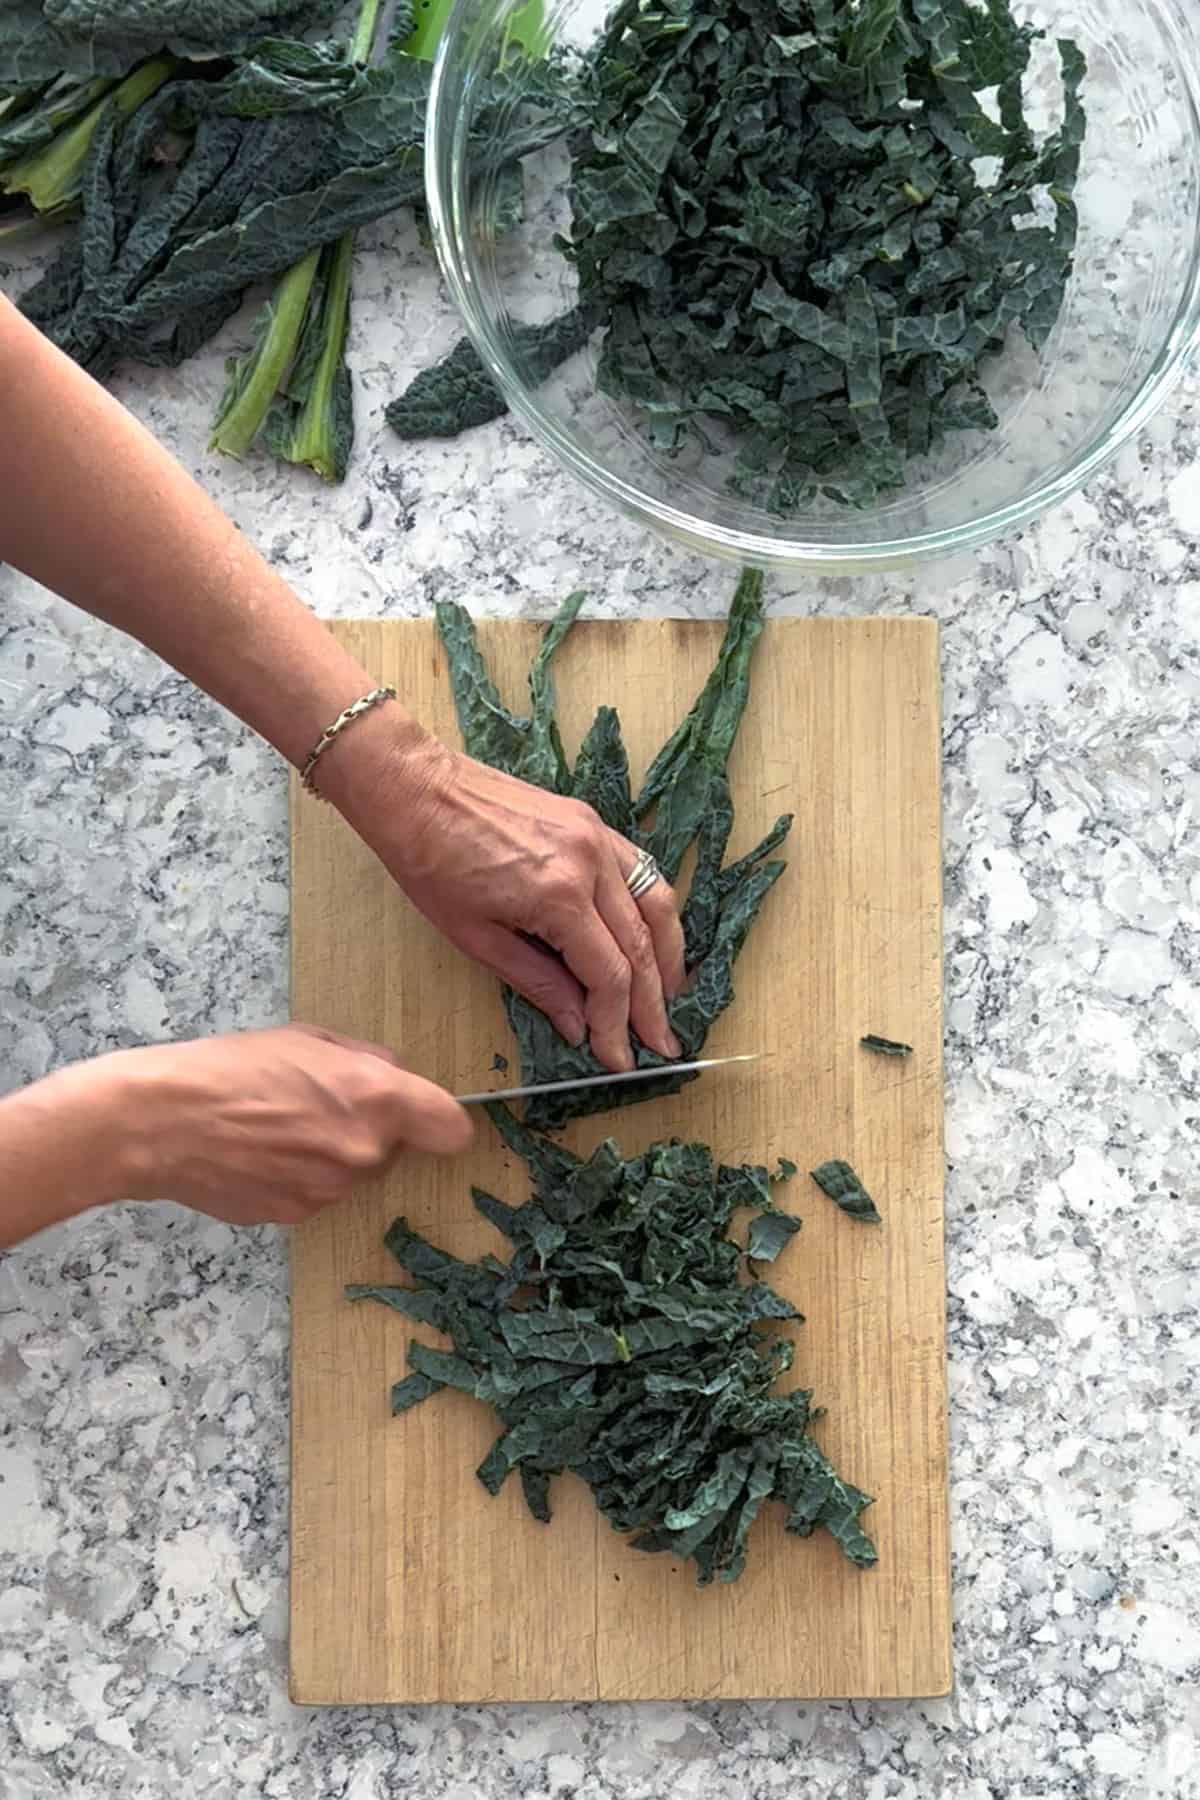 Hands shown slicing a stack of tuscan kale leaves, on a wooden cutting board, into thin slivers. A glass bowl of shredded tuscan kale sits next to the cutting board.